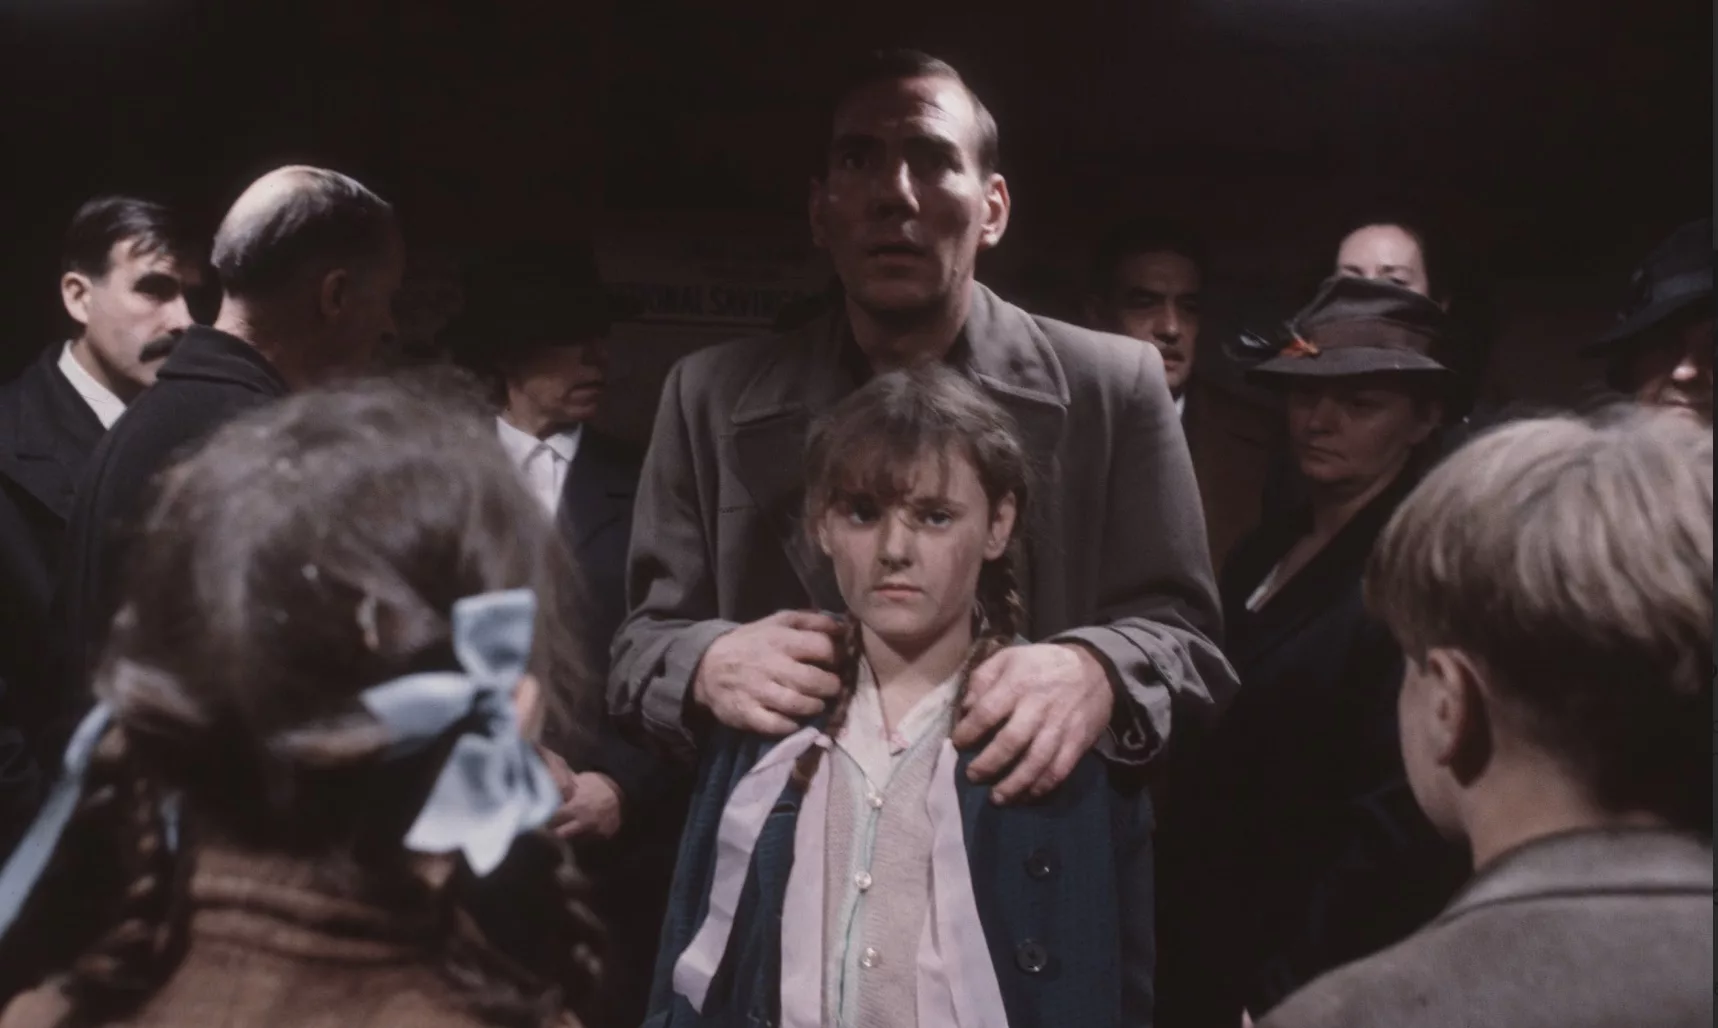 A man with a shocked look on his face stand behinds and holds a young girl amidst a crowd of people